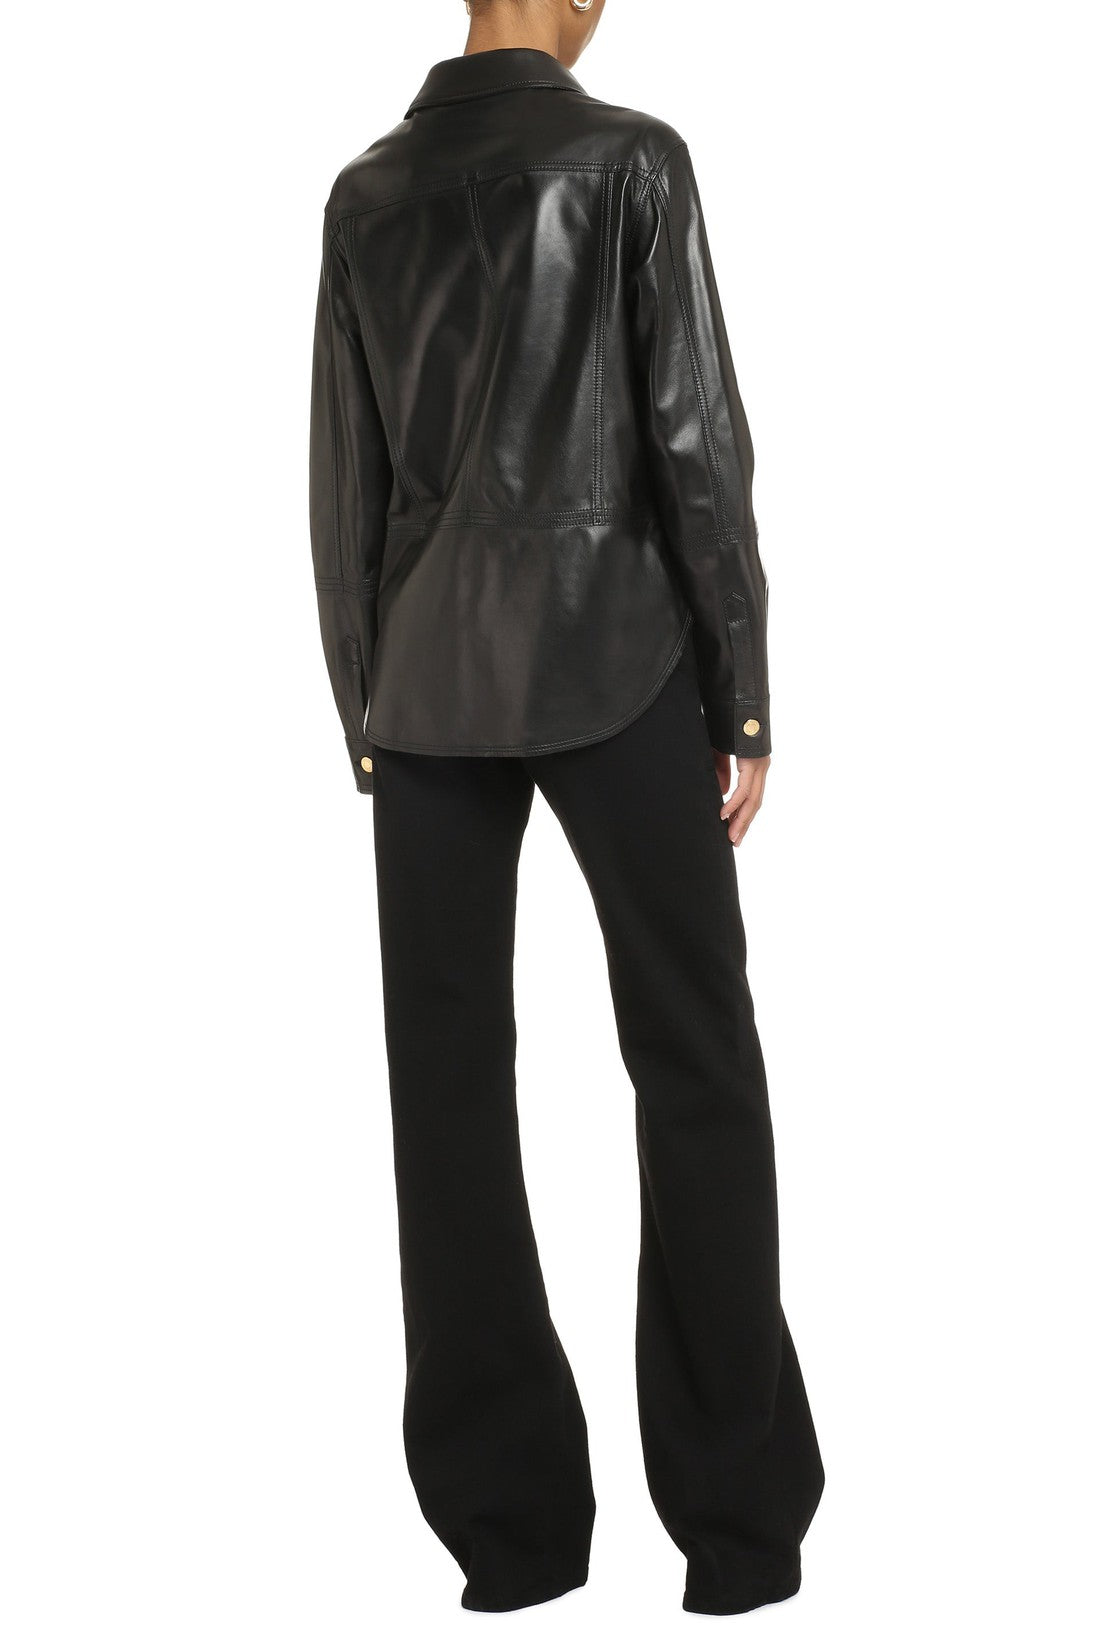 Tom Ford-OUTLET-SALE-Leather overshirt-ARCHIVIST